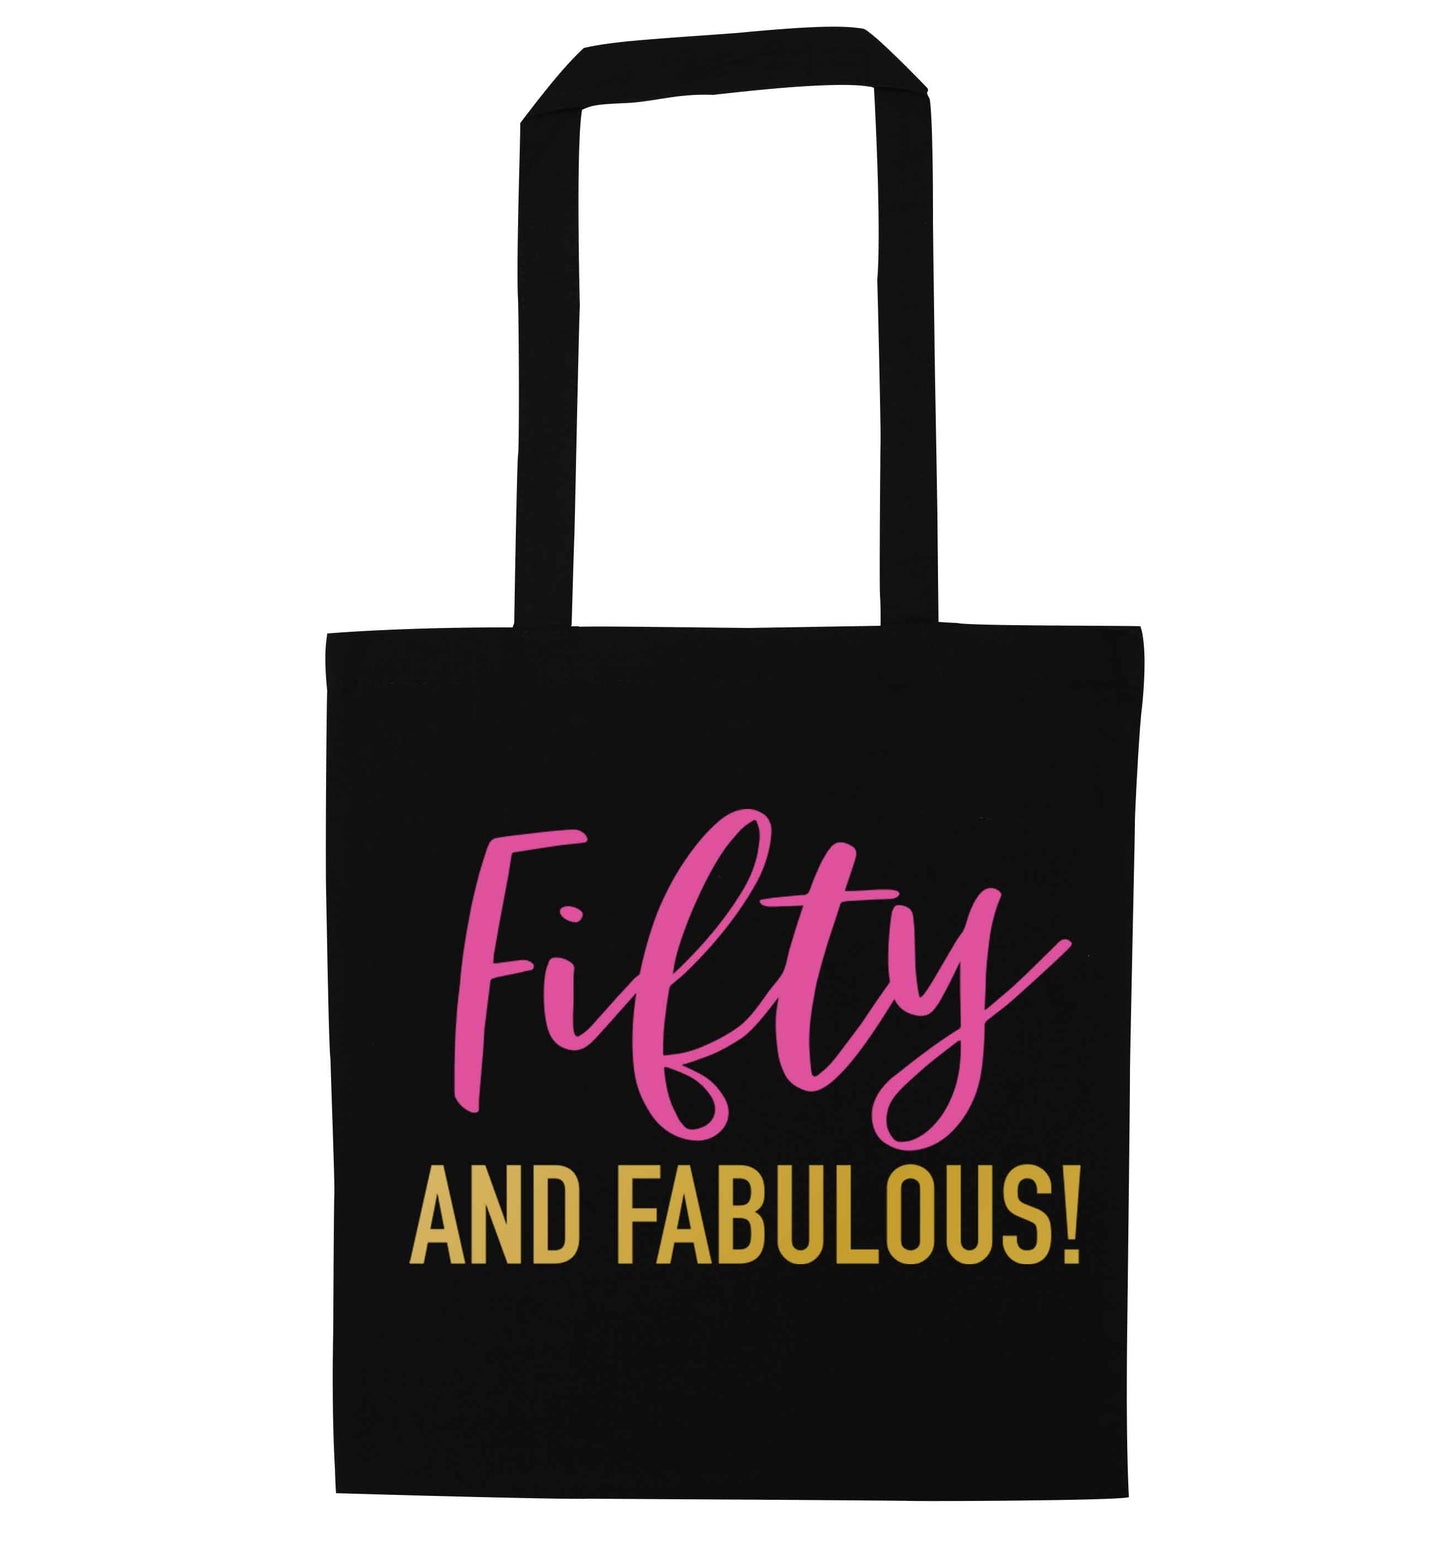 Fifty and fabulous black tote bag